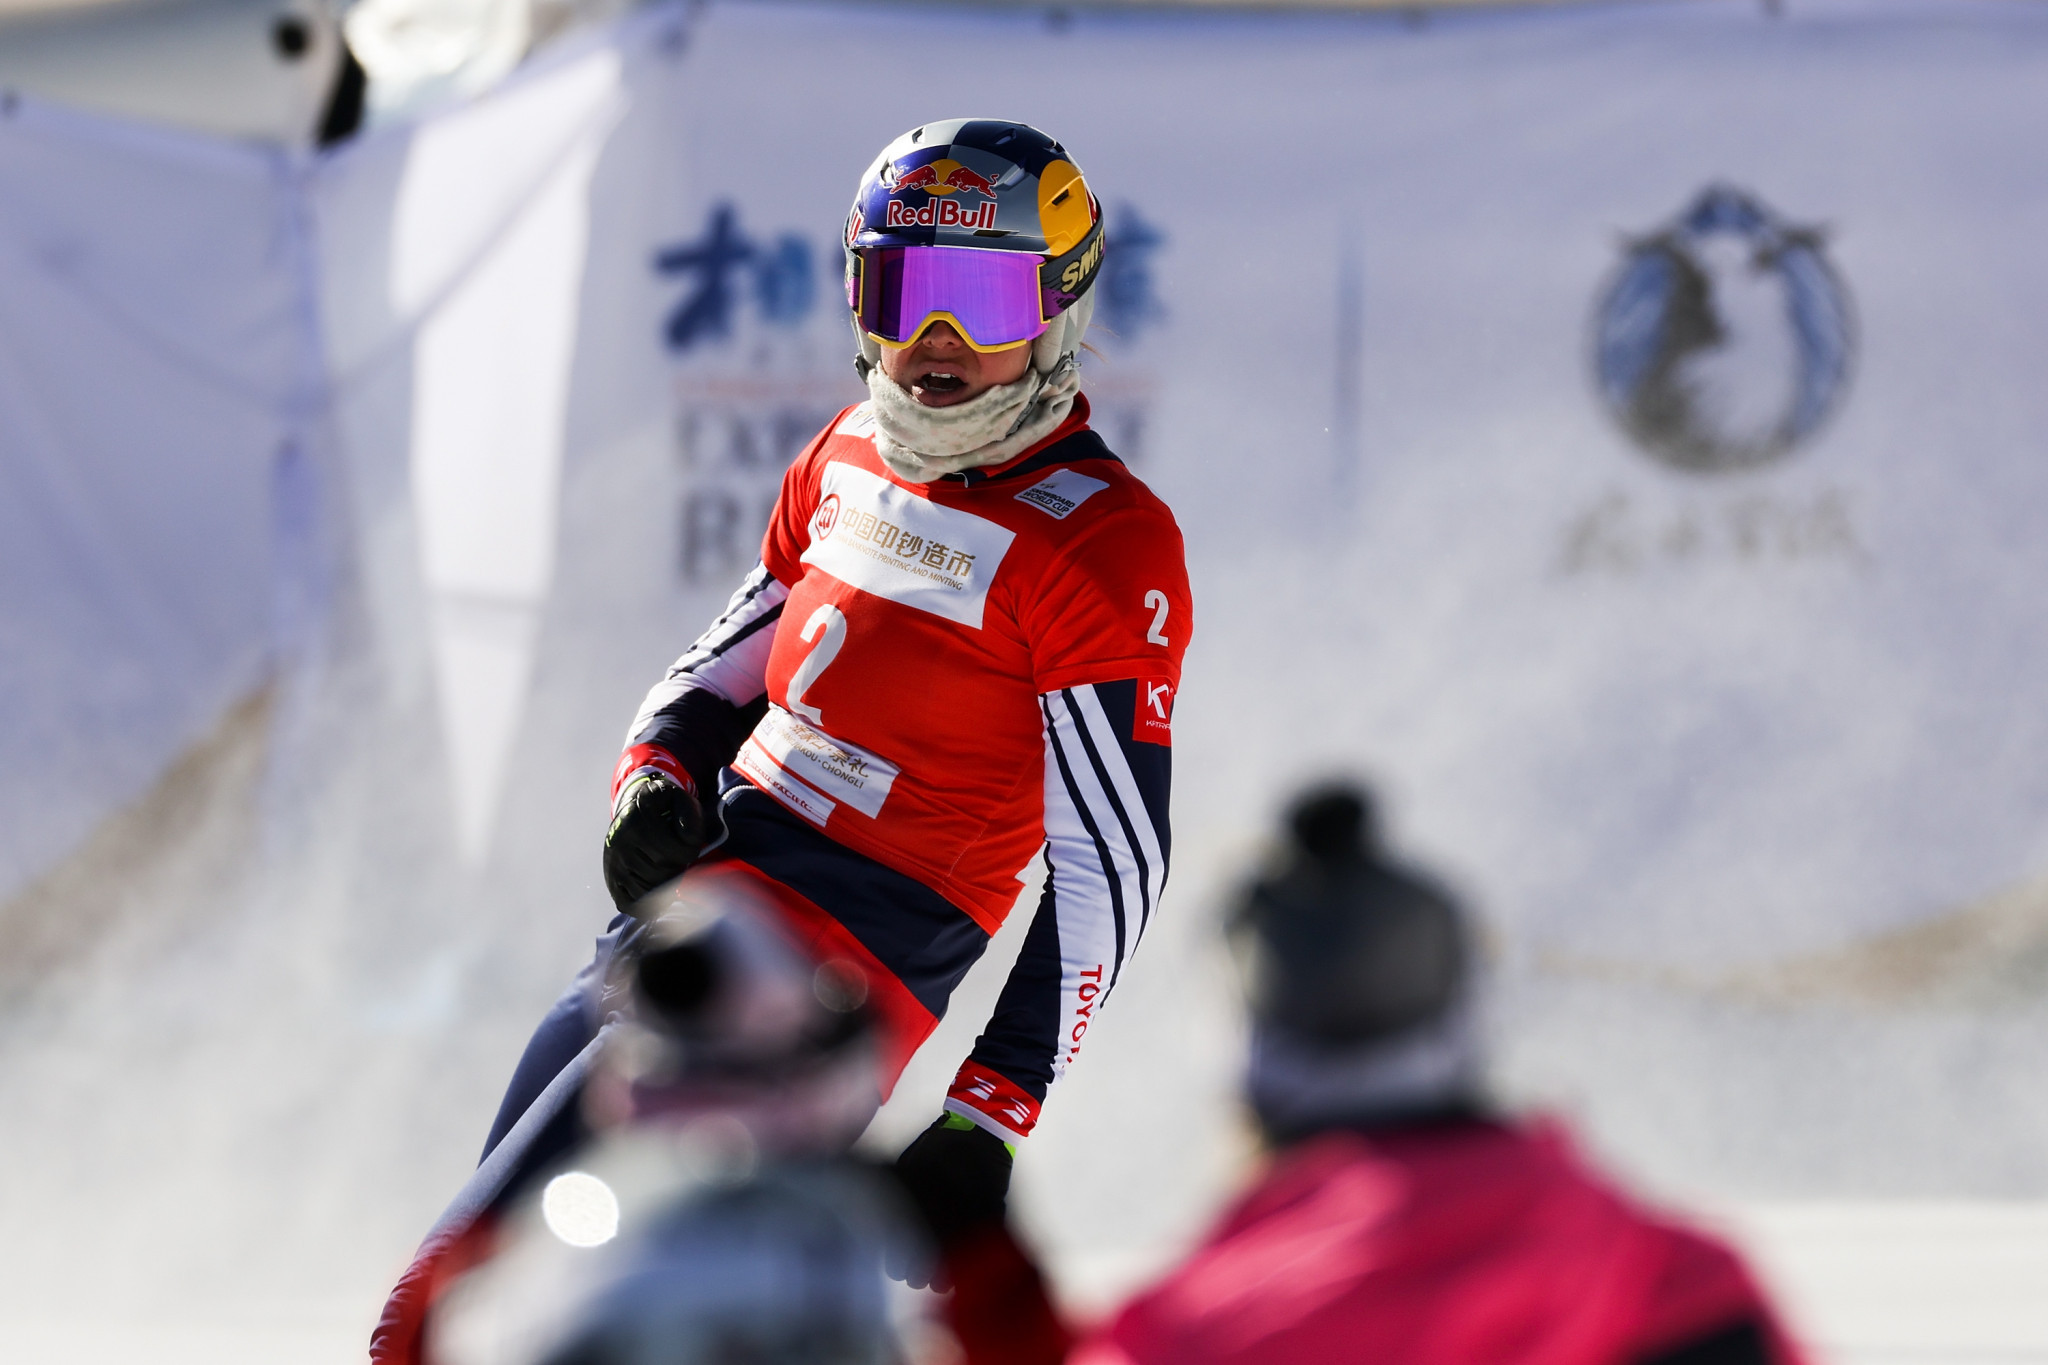 The Czech Republic's Eva Samková led women's qualification in the FIS Snowboard Cross World Cup at Secret Garden ©Getty Images